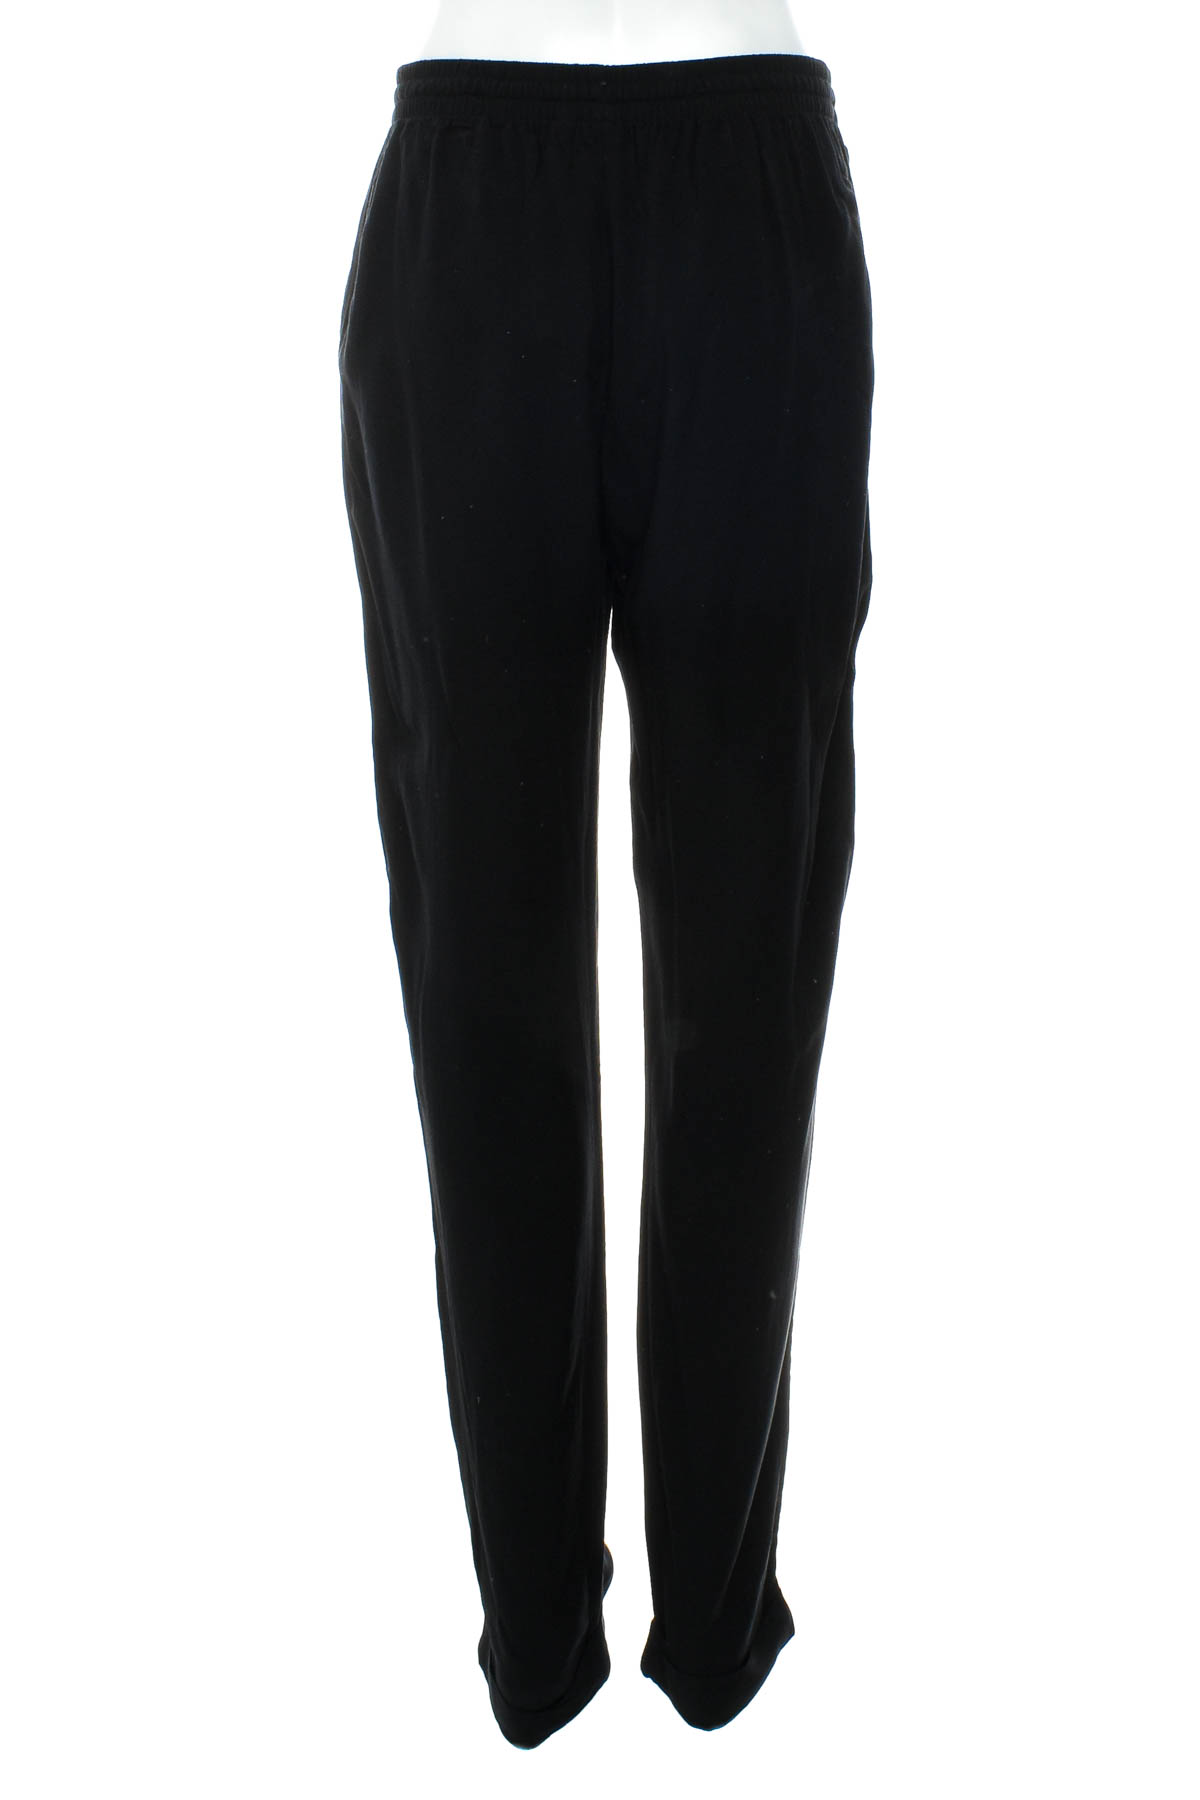 Women's trousers - Casual LADIES - 1